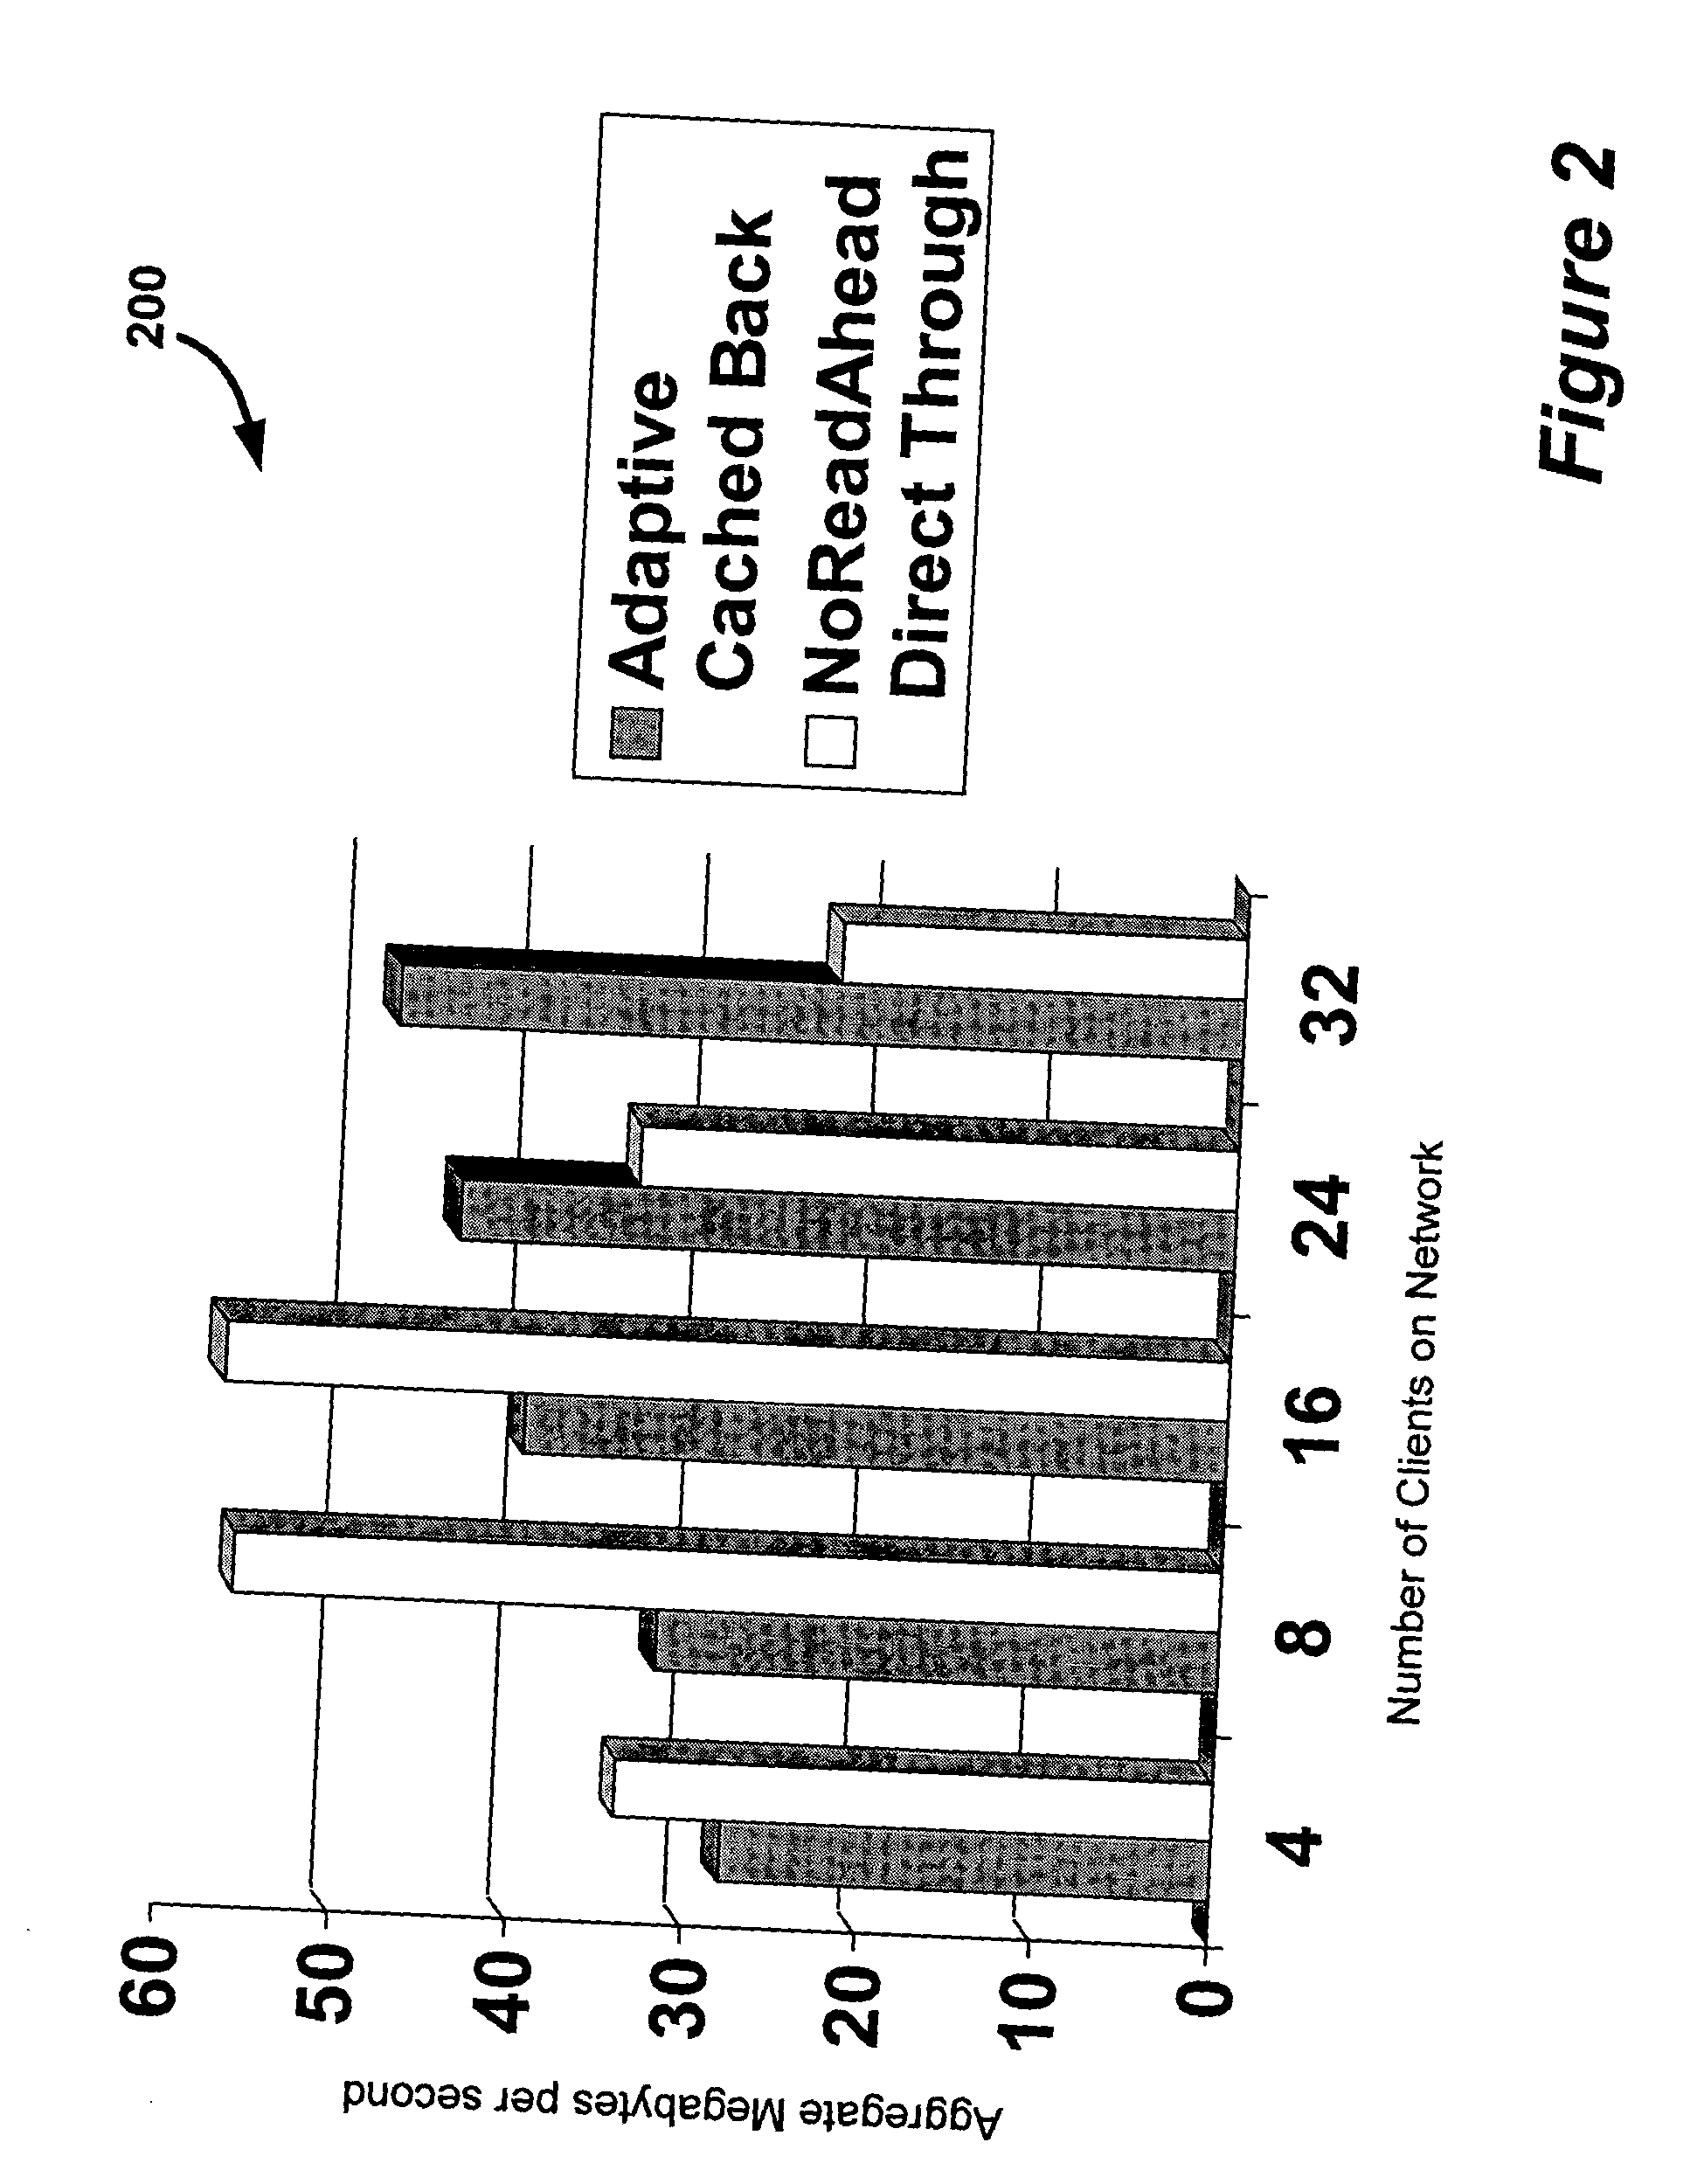 Dynamically varying a raid cache policy in order to optimize throughput